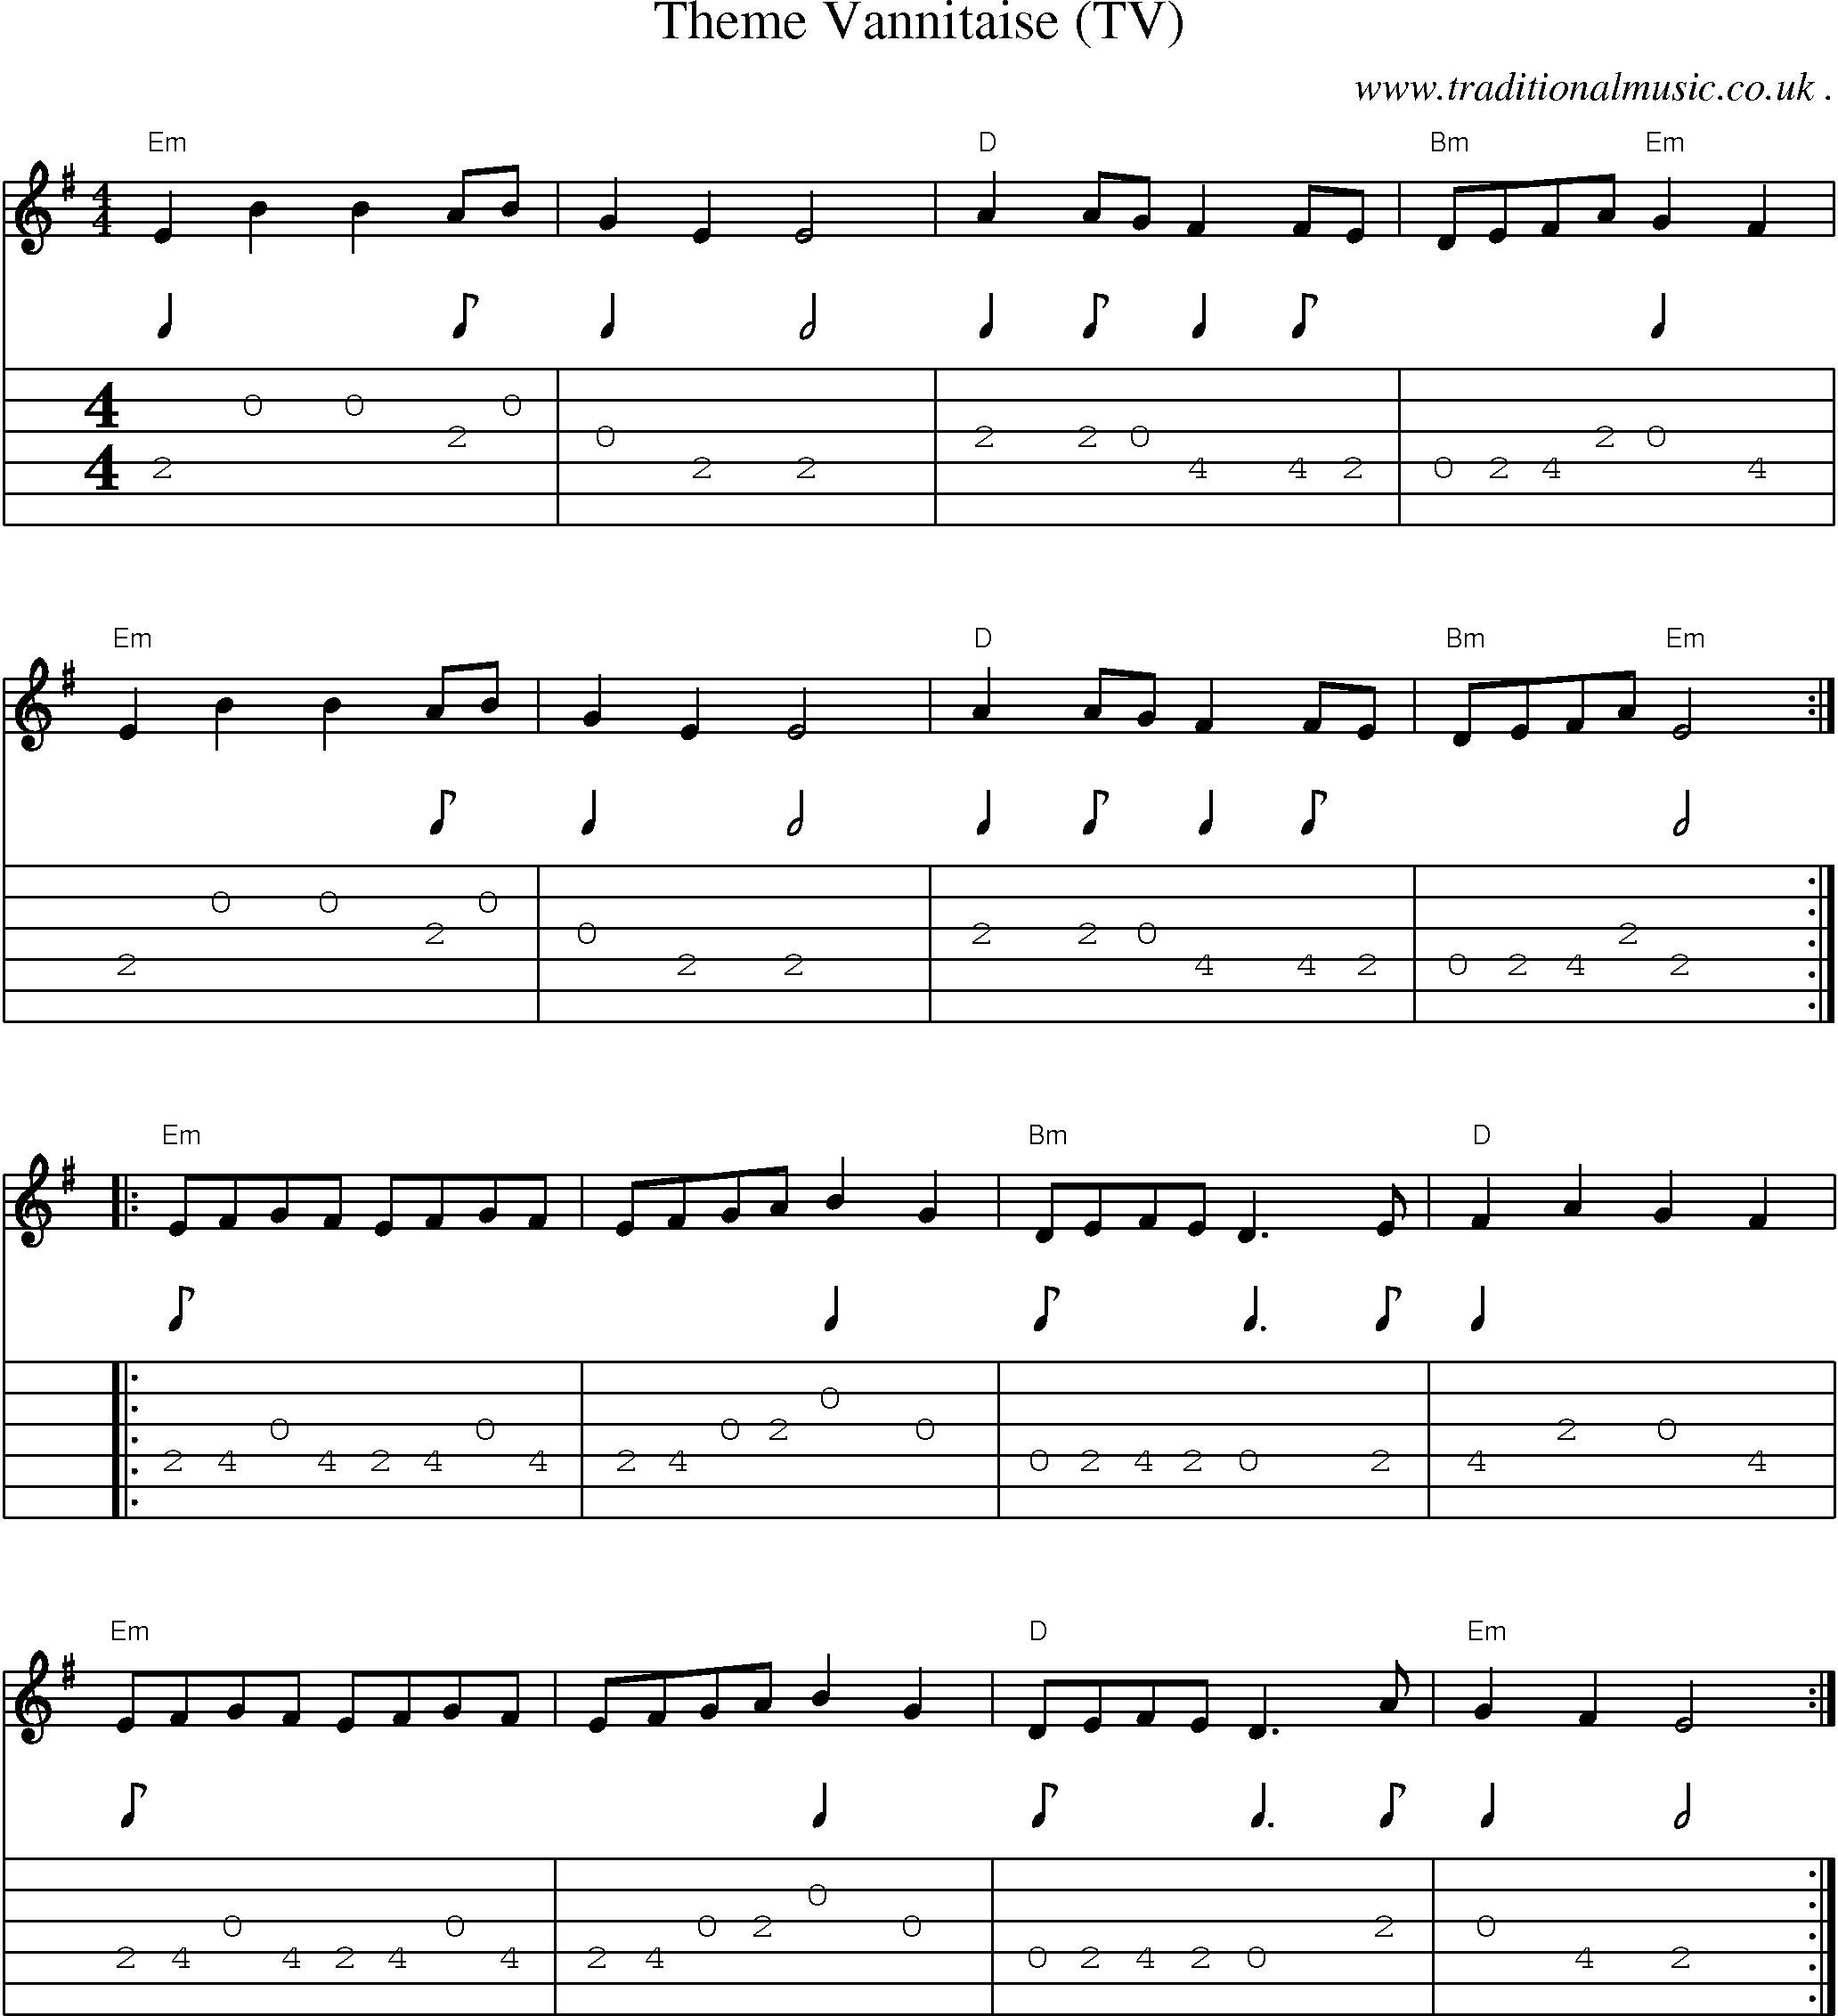 Music Score and Guitar Tabs for Theme Vannitaise (TV)